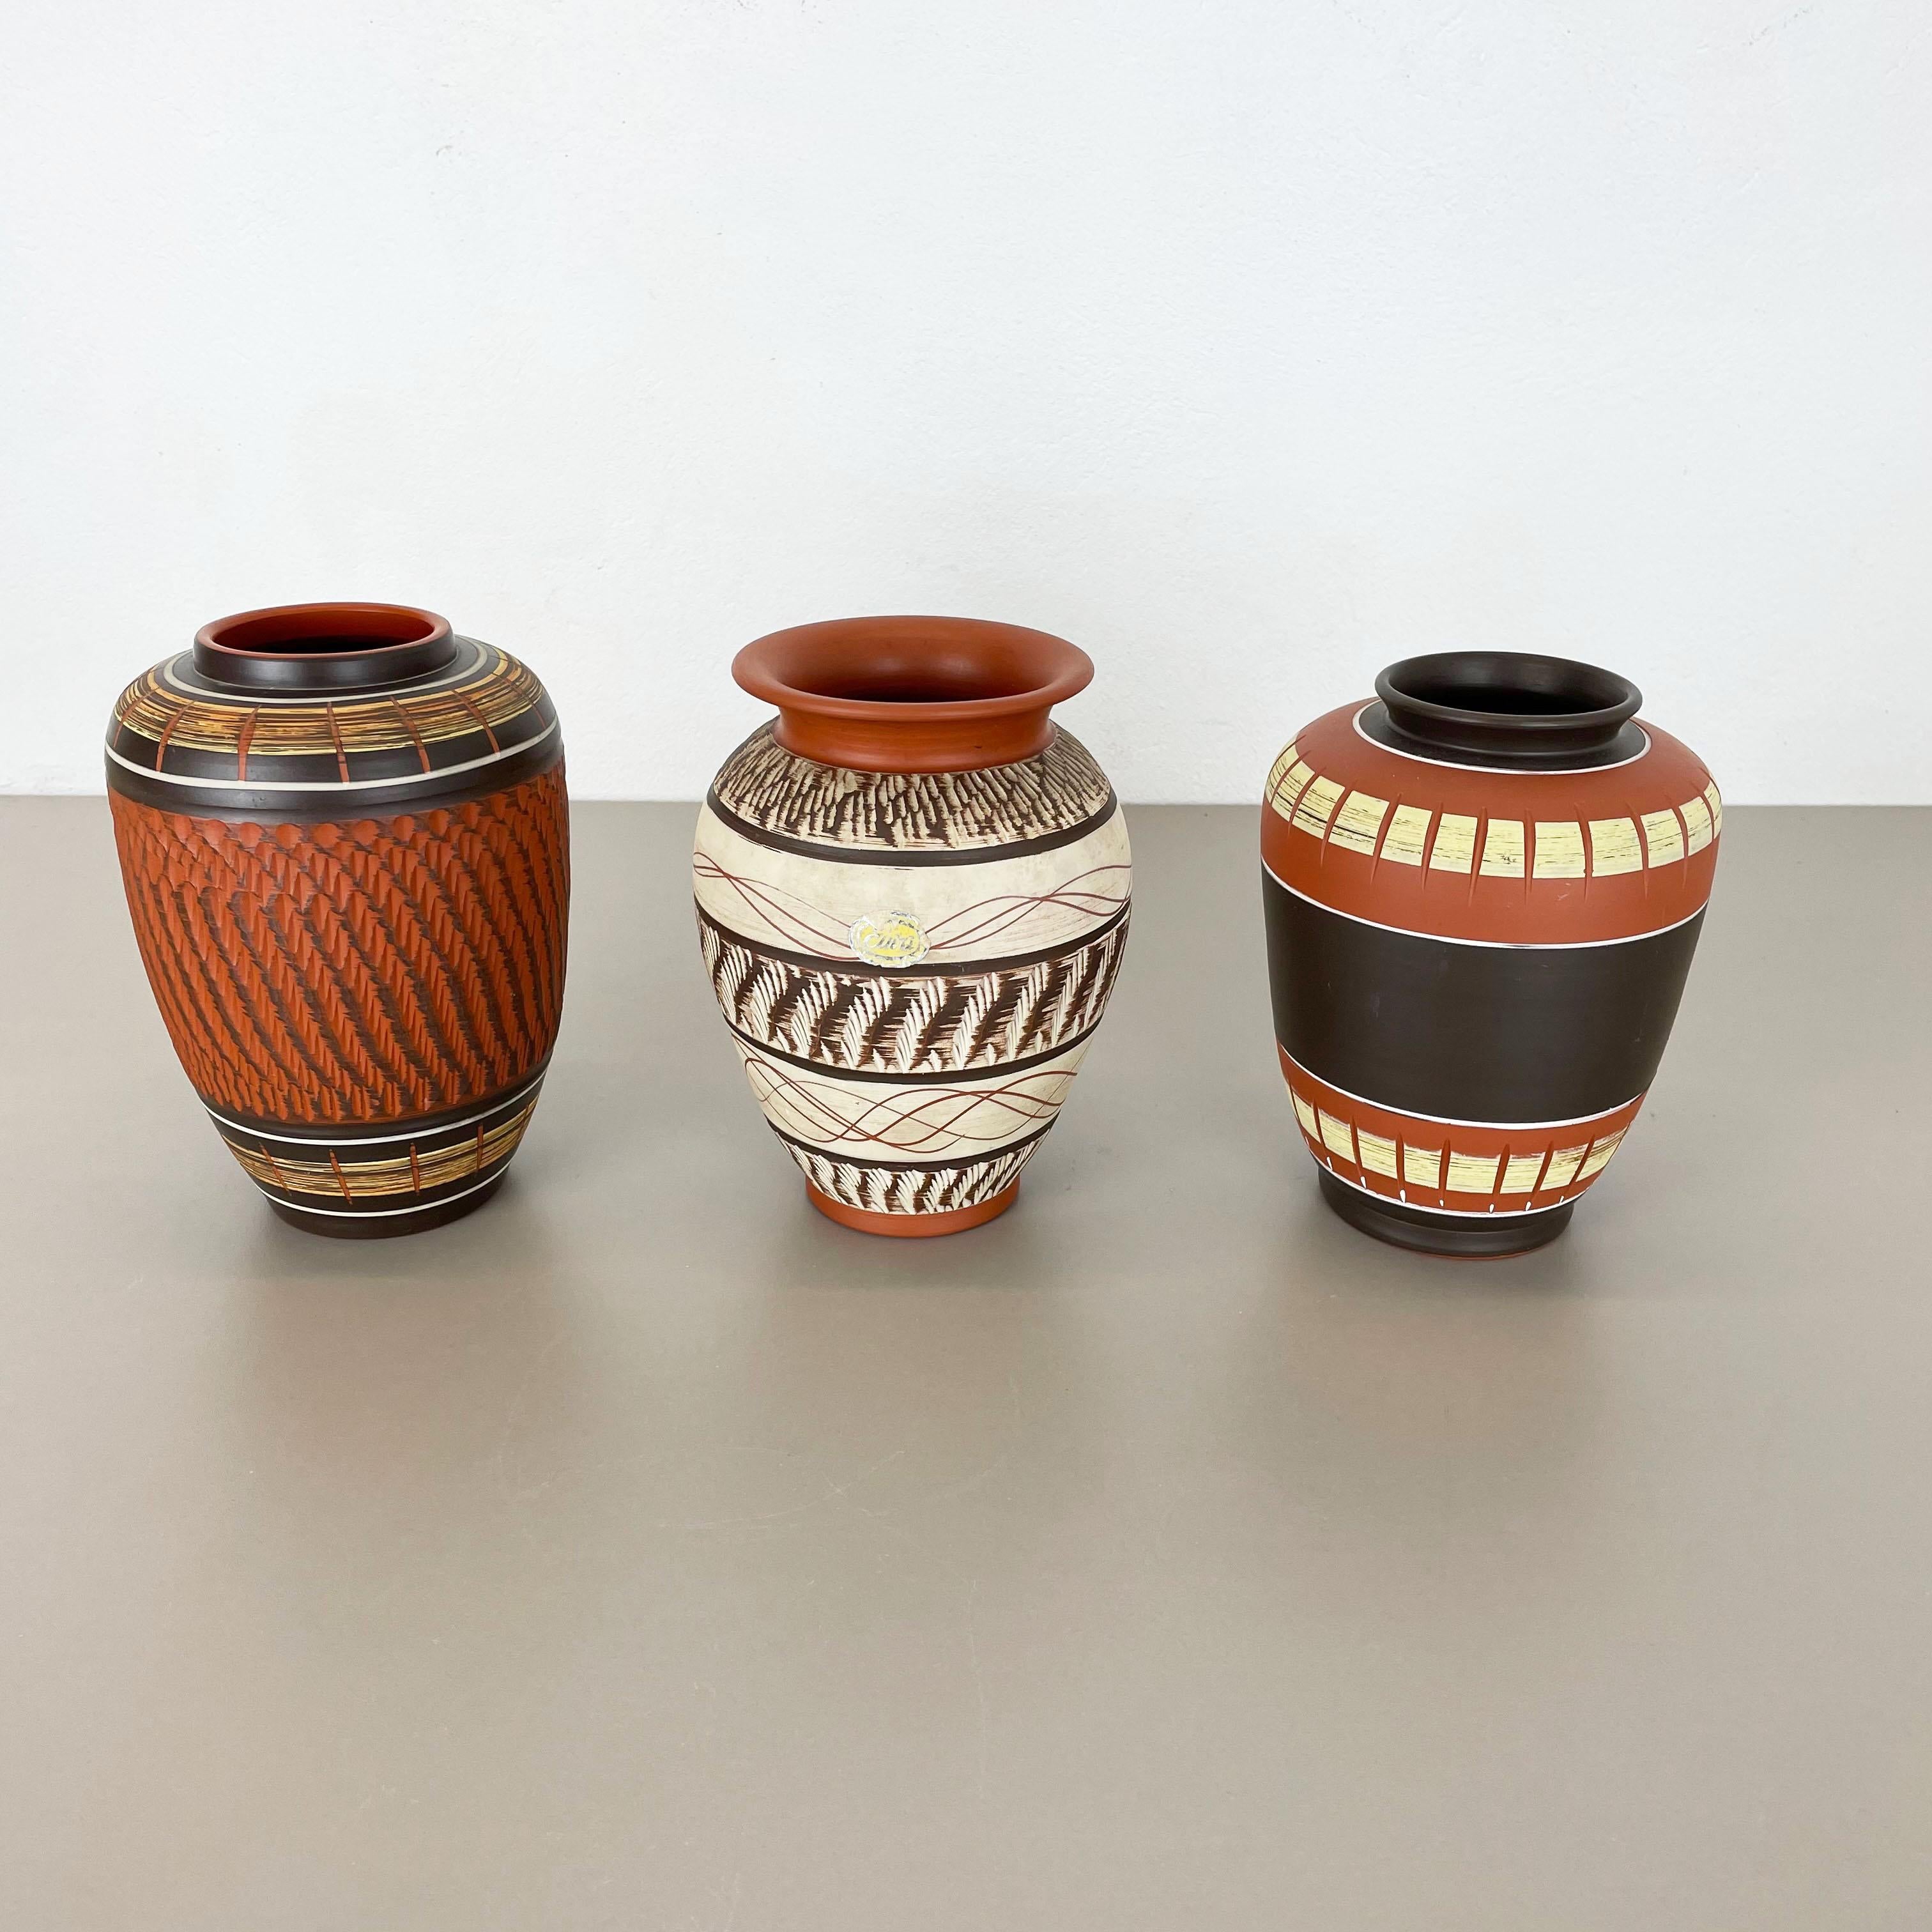 Article:

Pottery ceramic vase set of 3


Producer:

3 different Germany Ceramic Producers



Decade:

1950s



Original vintage 1950s pottery ceramic vase set made in Germany. High quality German production with a nice abstract painting. These vase